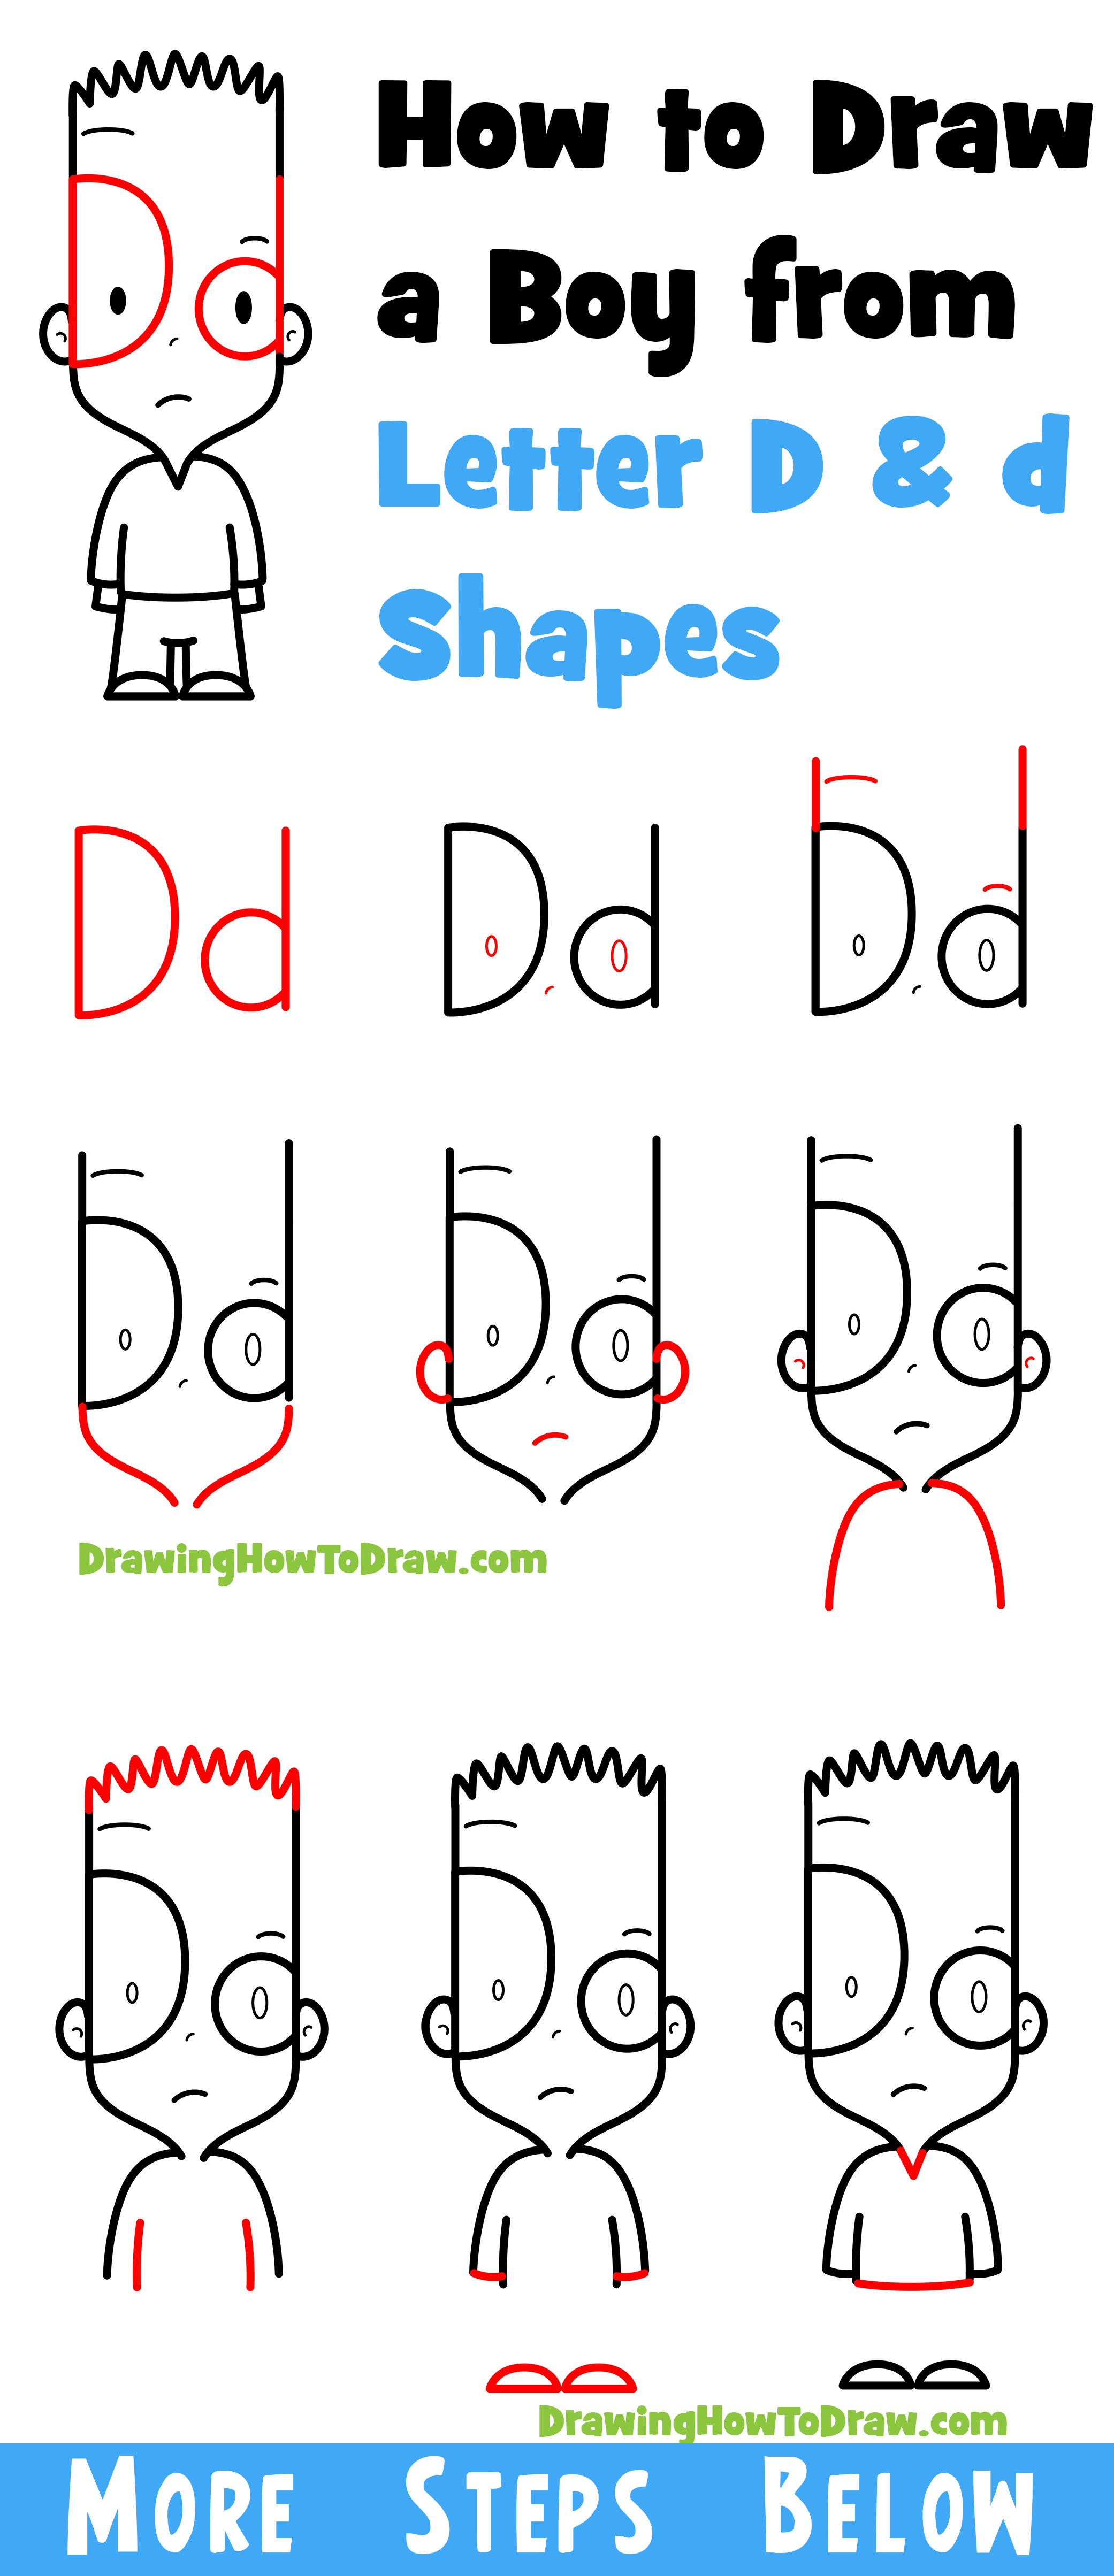 How to Draw a Cartoon Boy with Capital and Lowercase Letter D Shapes - Easy Step-by-Step Drawing Tutorial for Kids